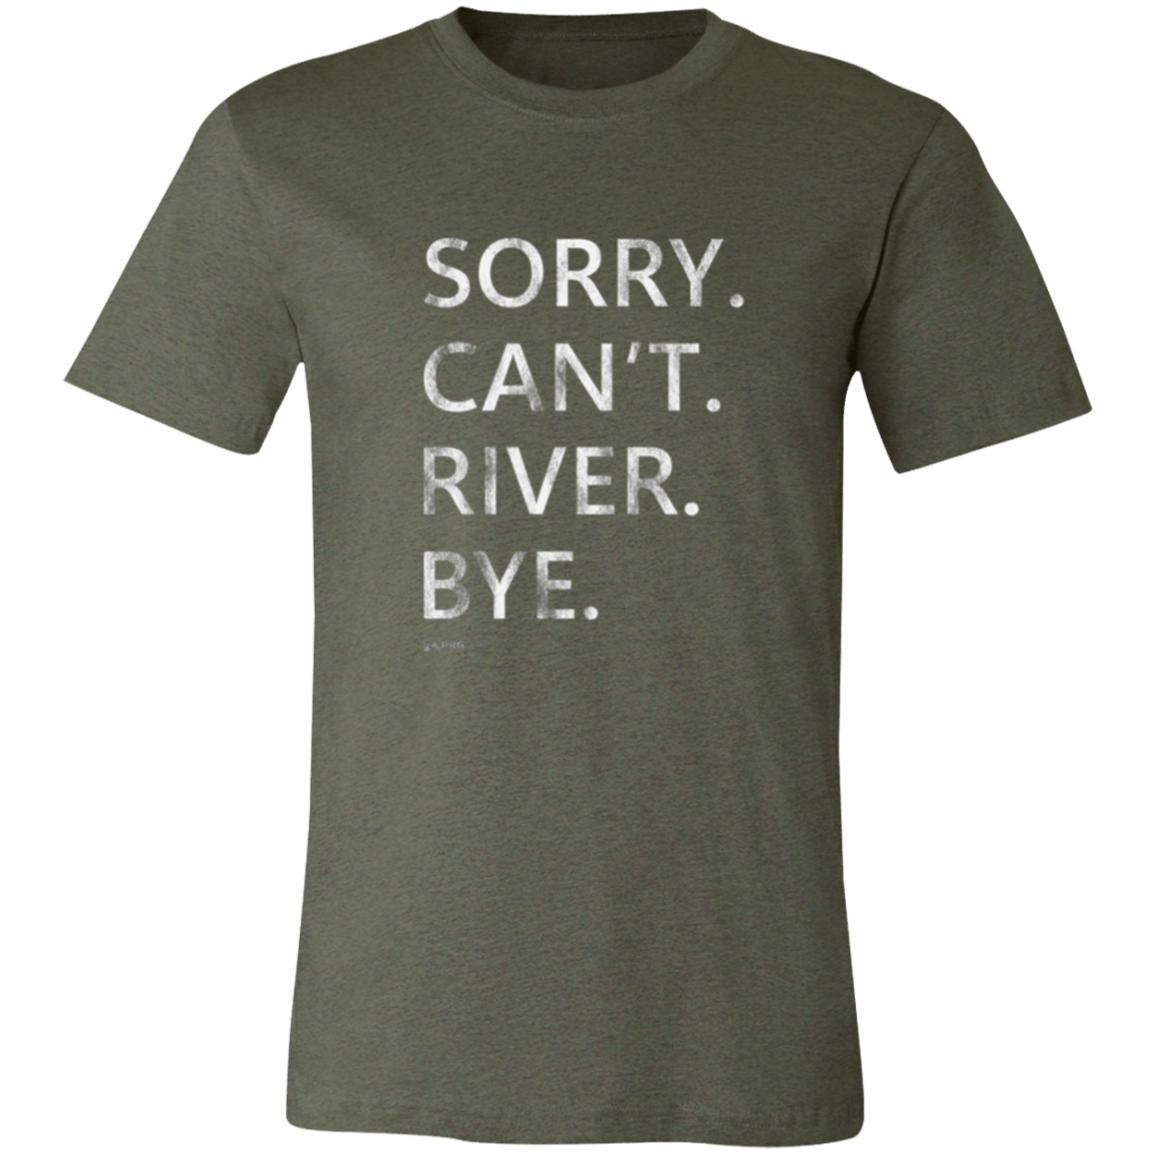 Sorry. Can't. River. Bye. - Shirt